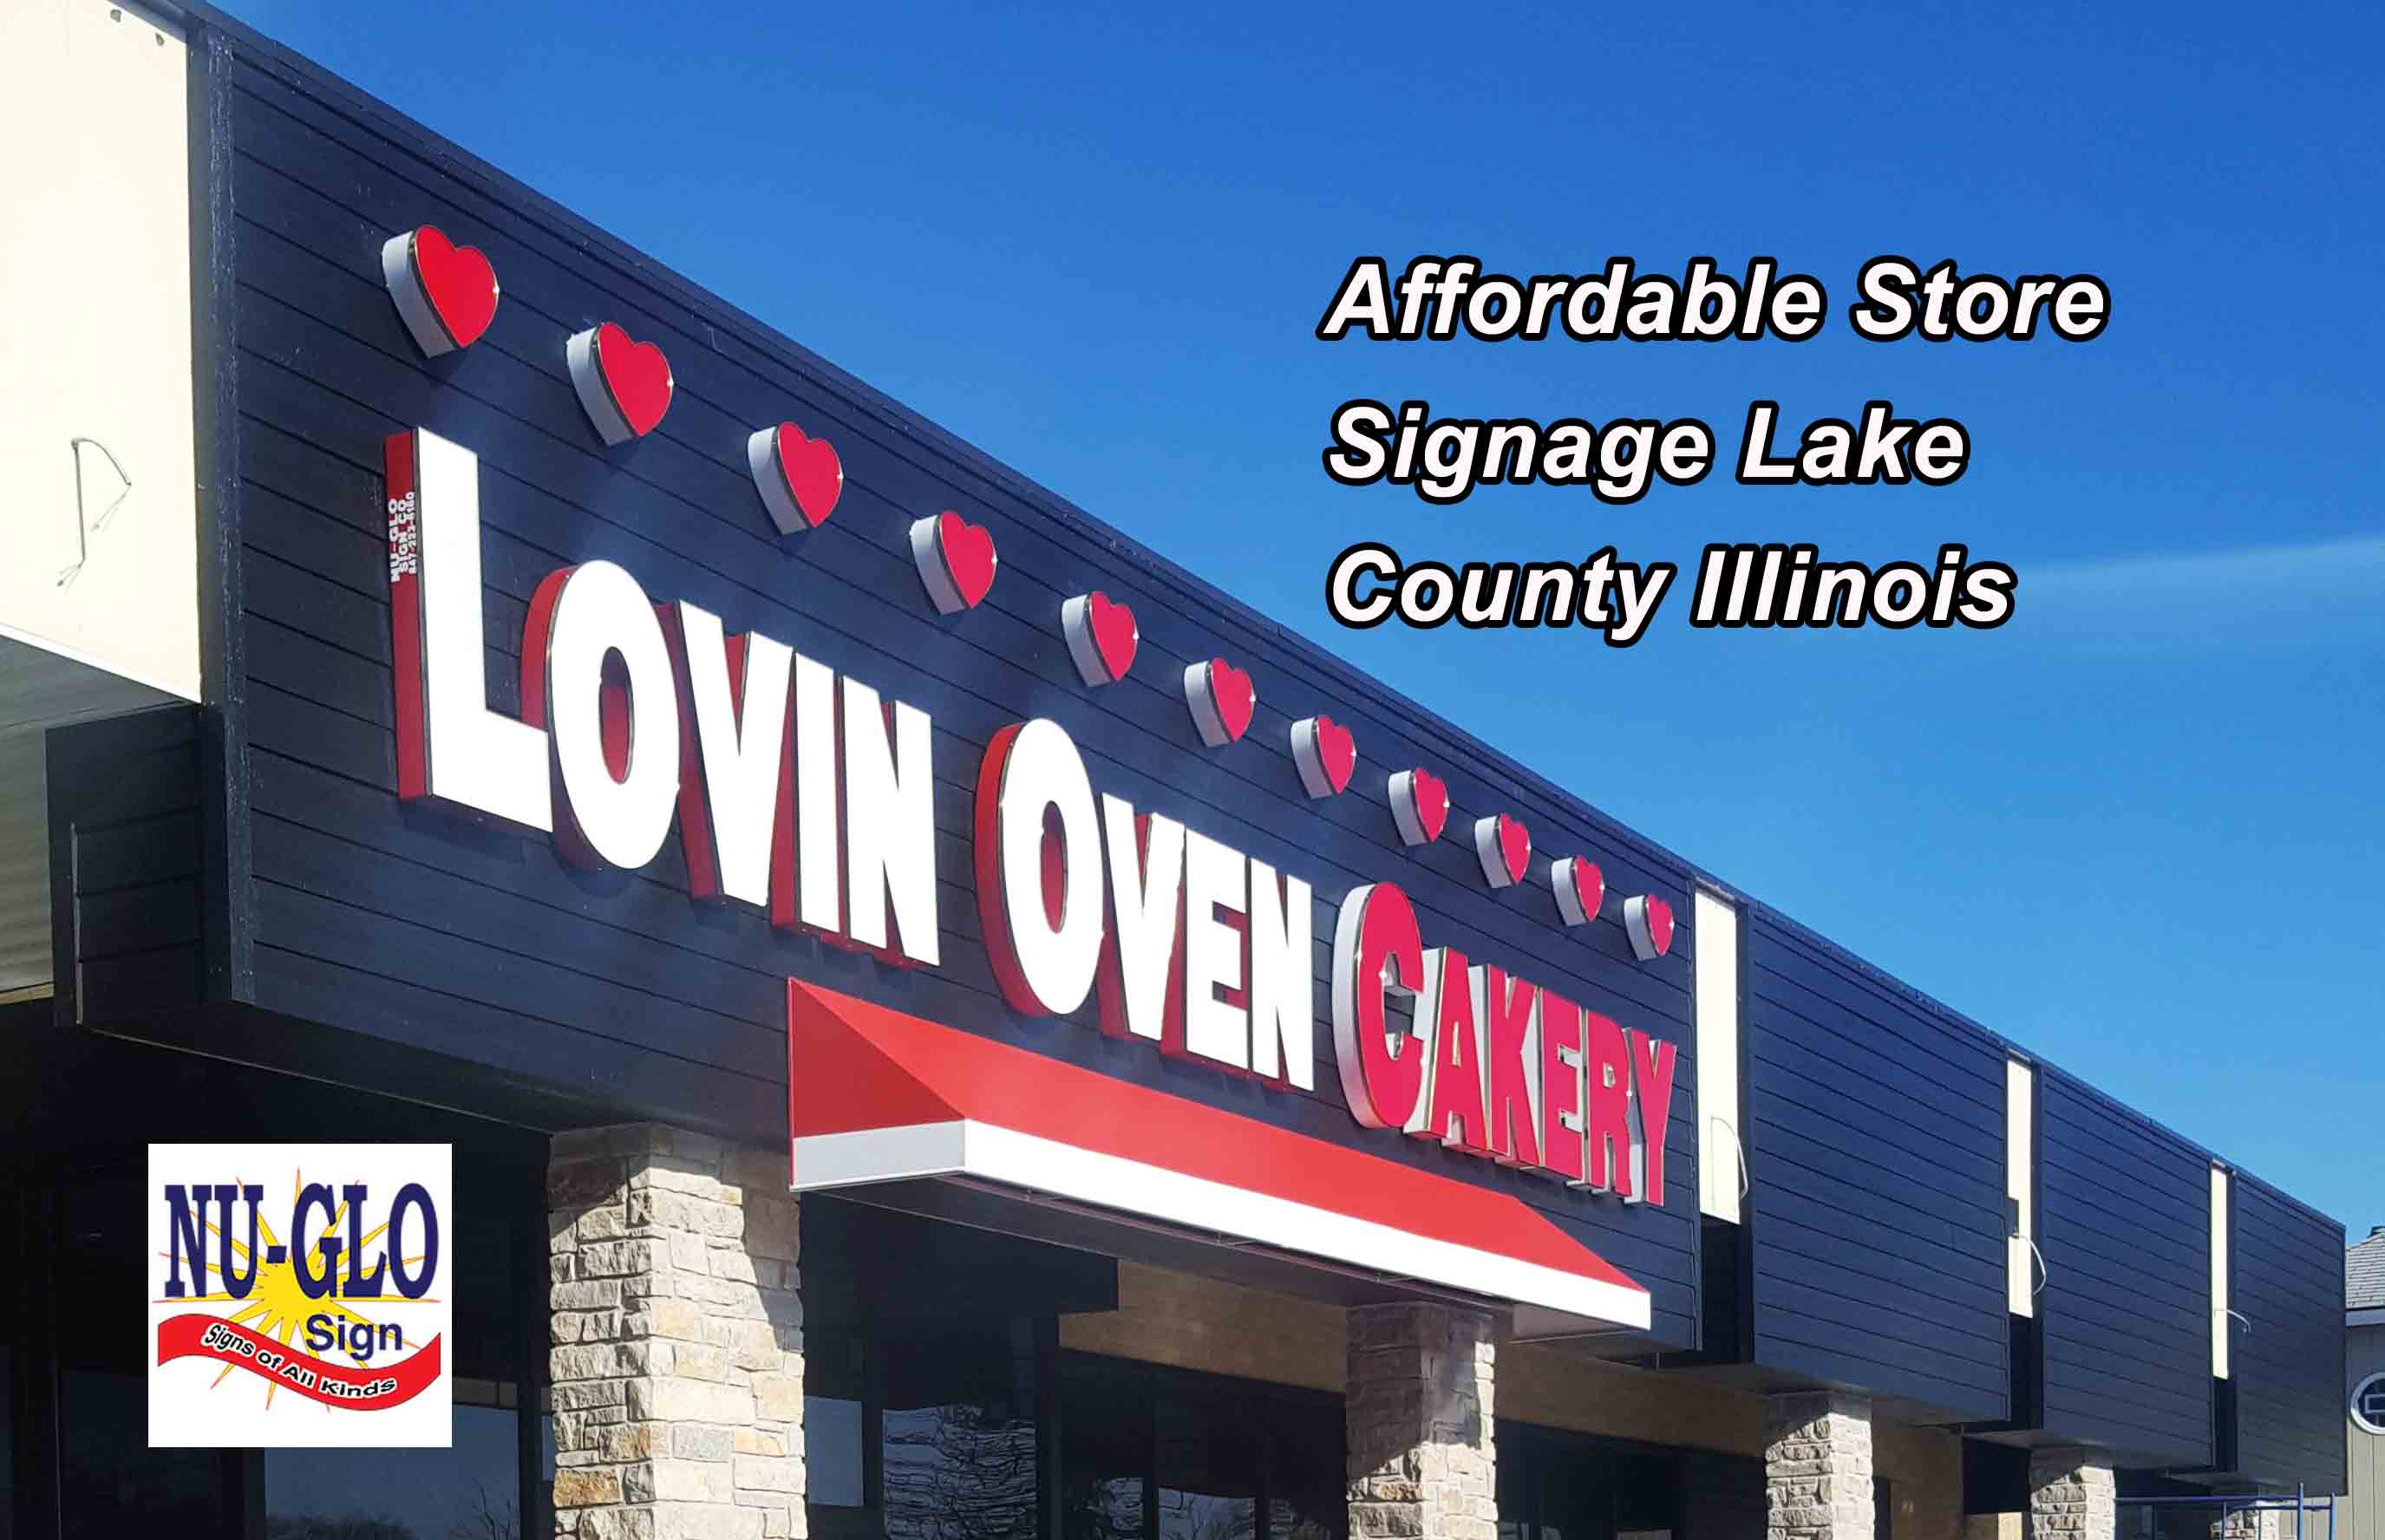 Affordable Store Signage Lake County